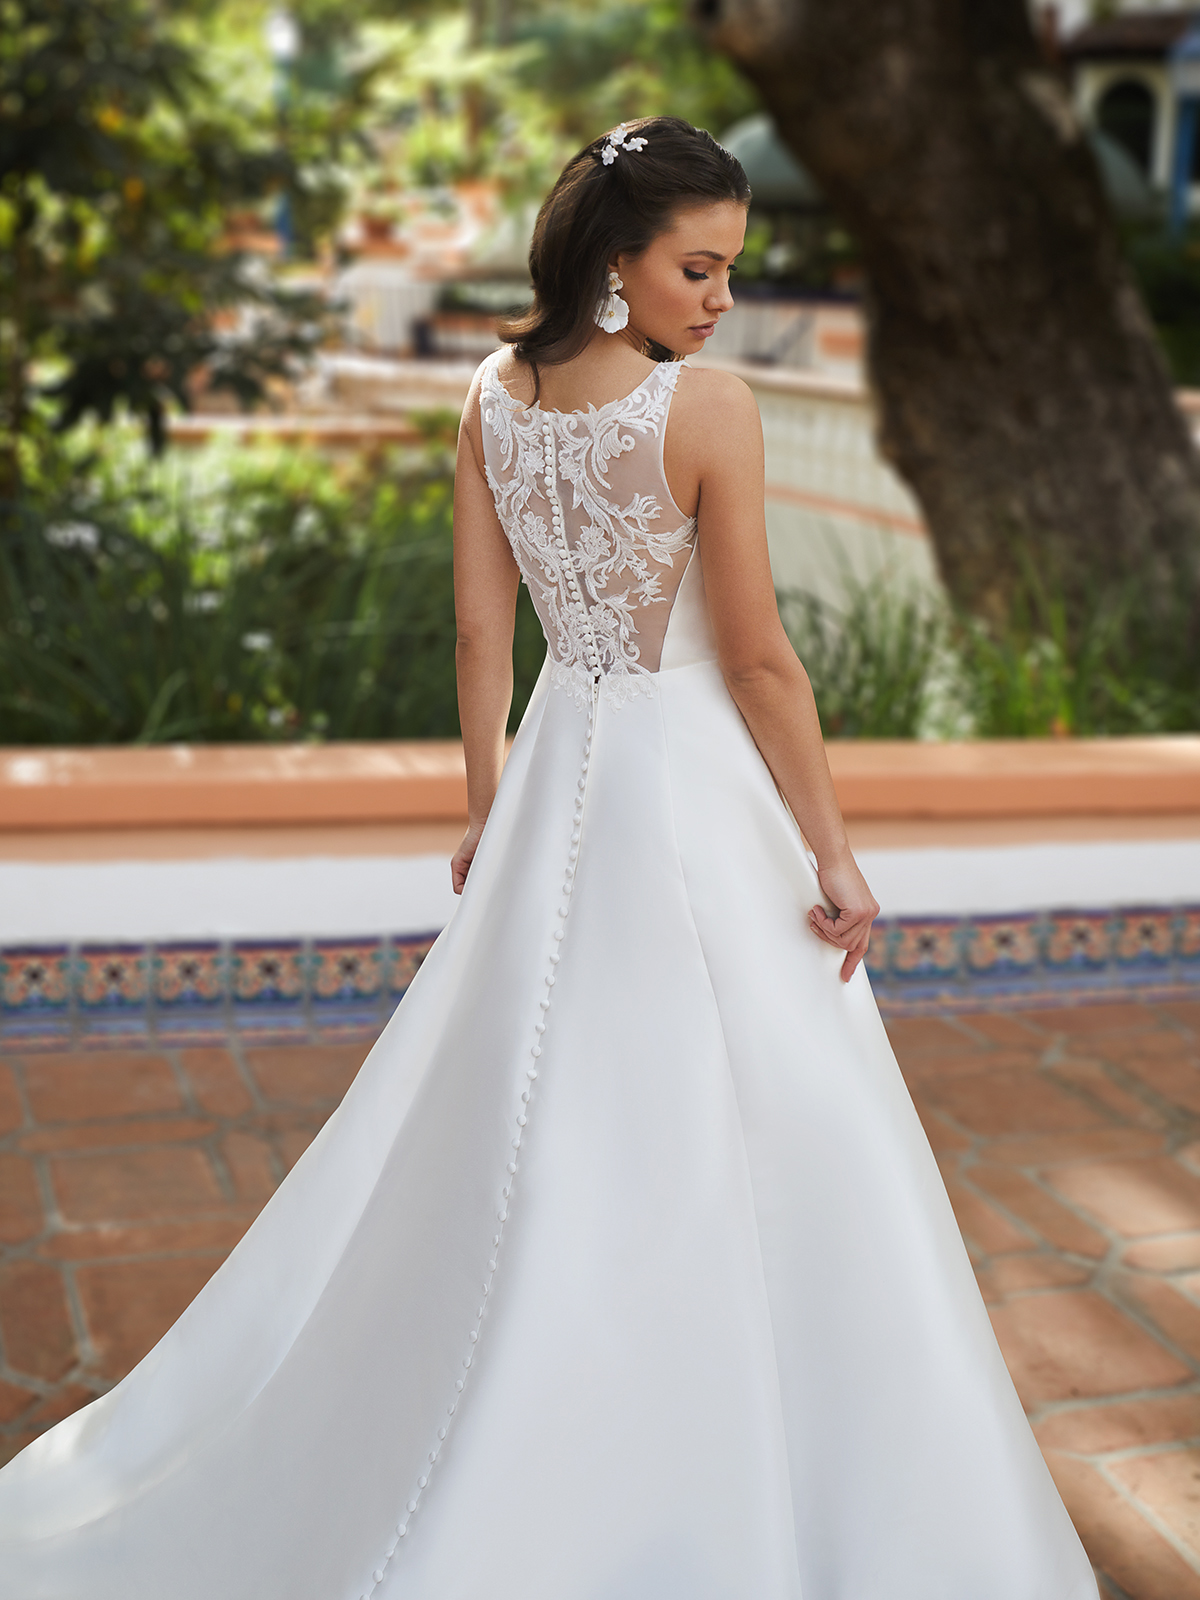 Best Wedding Dresses: 51 Bridal Gowns + Tips / Advice